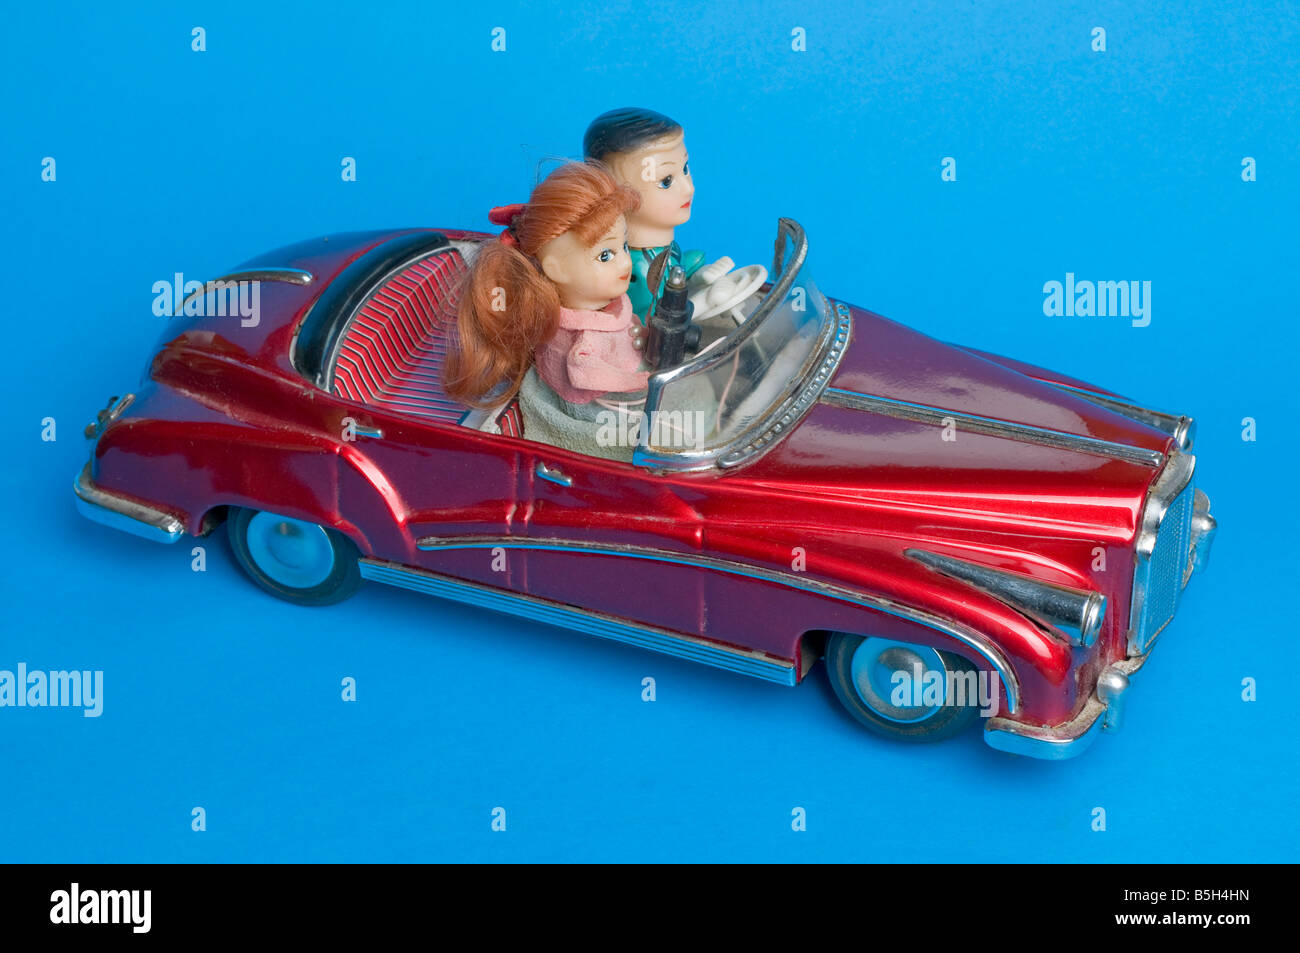 Pressed metal novelty toy battery powered car with driver sitting beside a woman photographer with camera and flash. Stock Photo